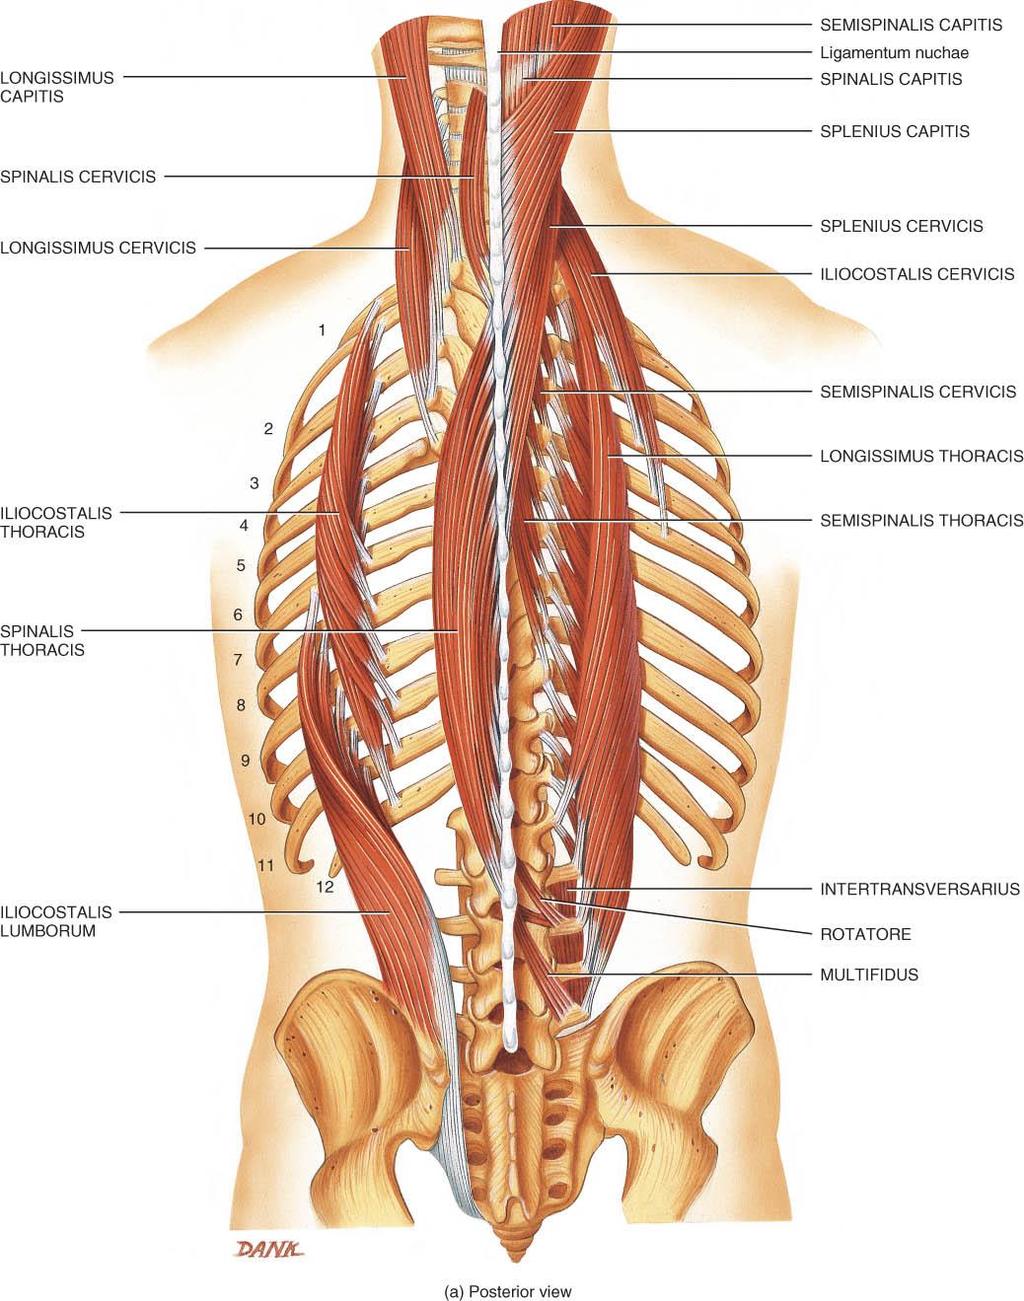 MUSCLES THAT MOVE THE VERTEBRAE o o o Quite complex due to overlap Erector spinae fibers run longitudinally 3 groupings spinalis iliocostalis longissimus extend vertebral